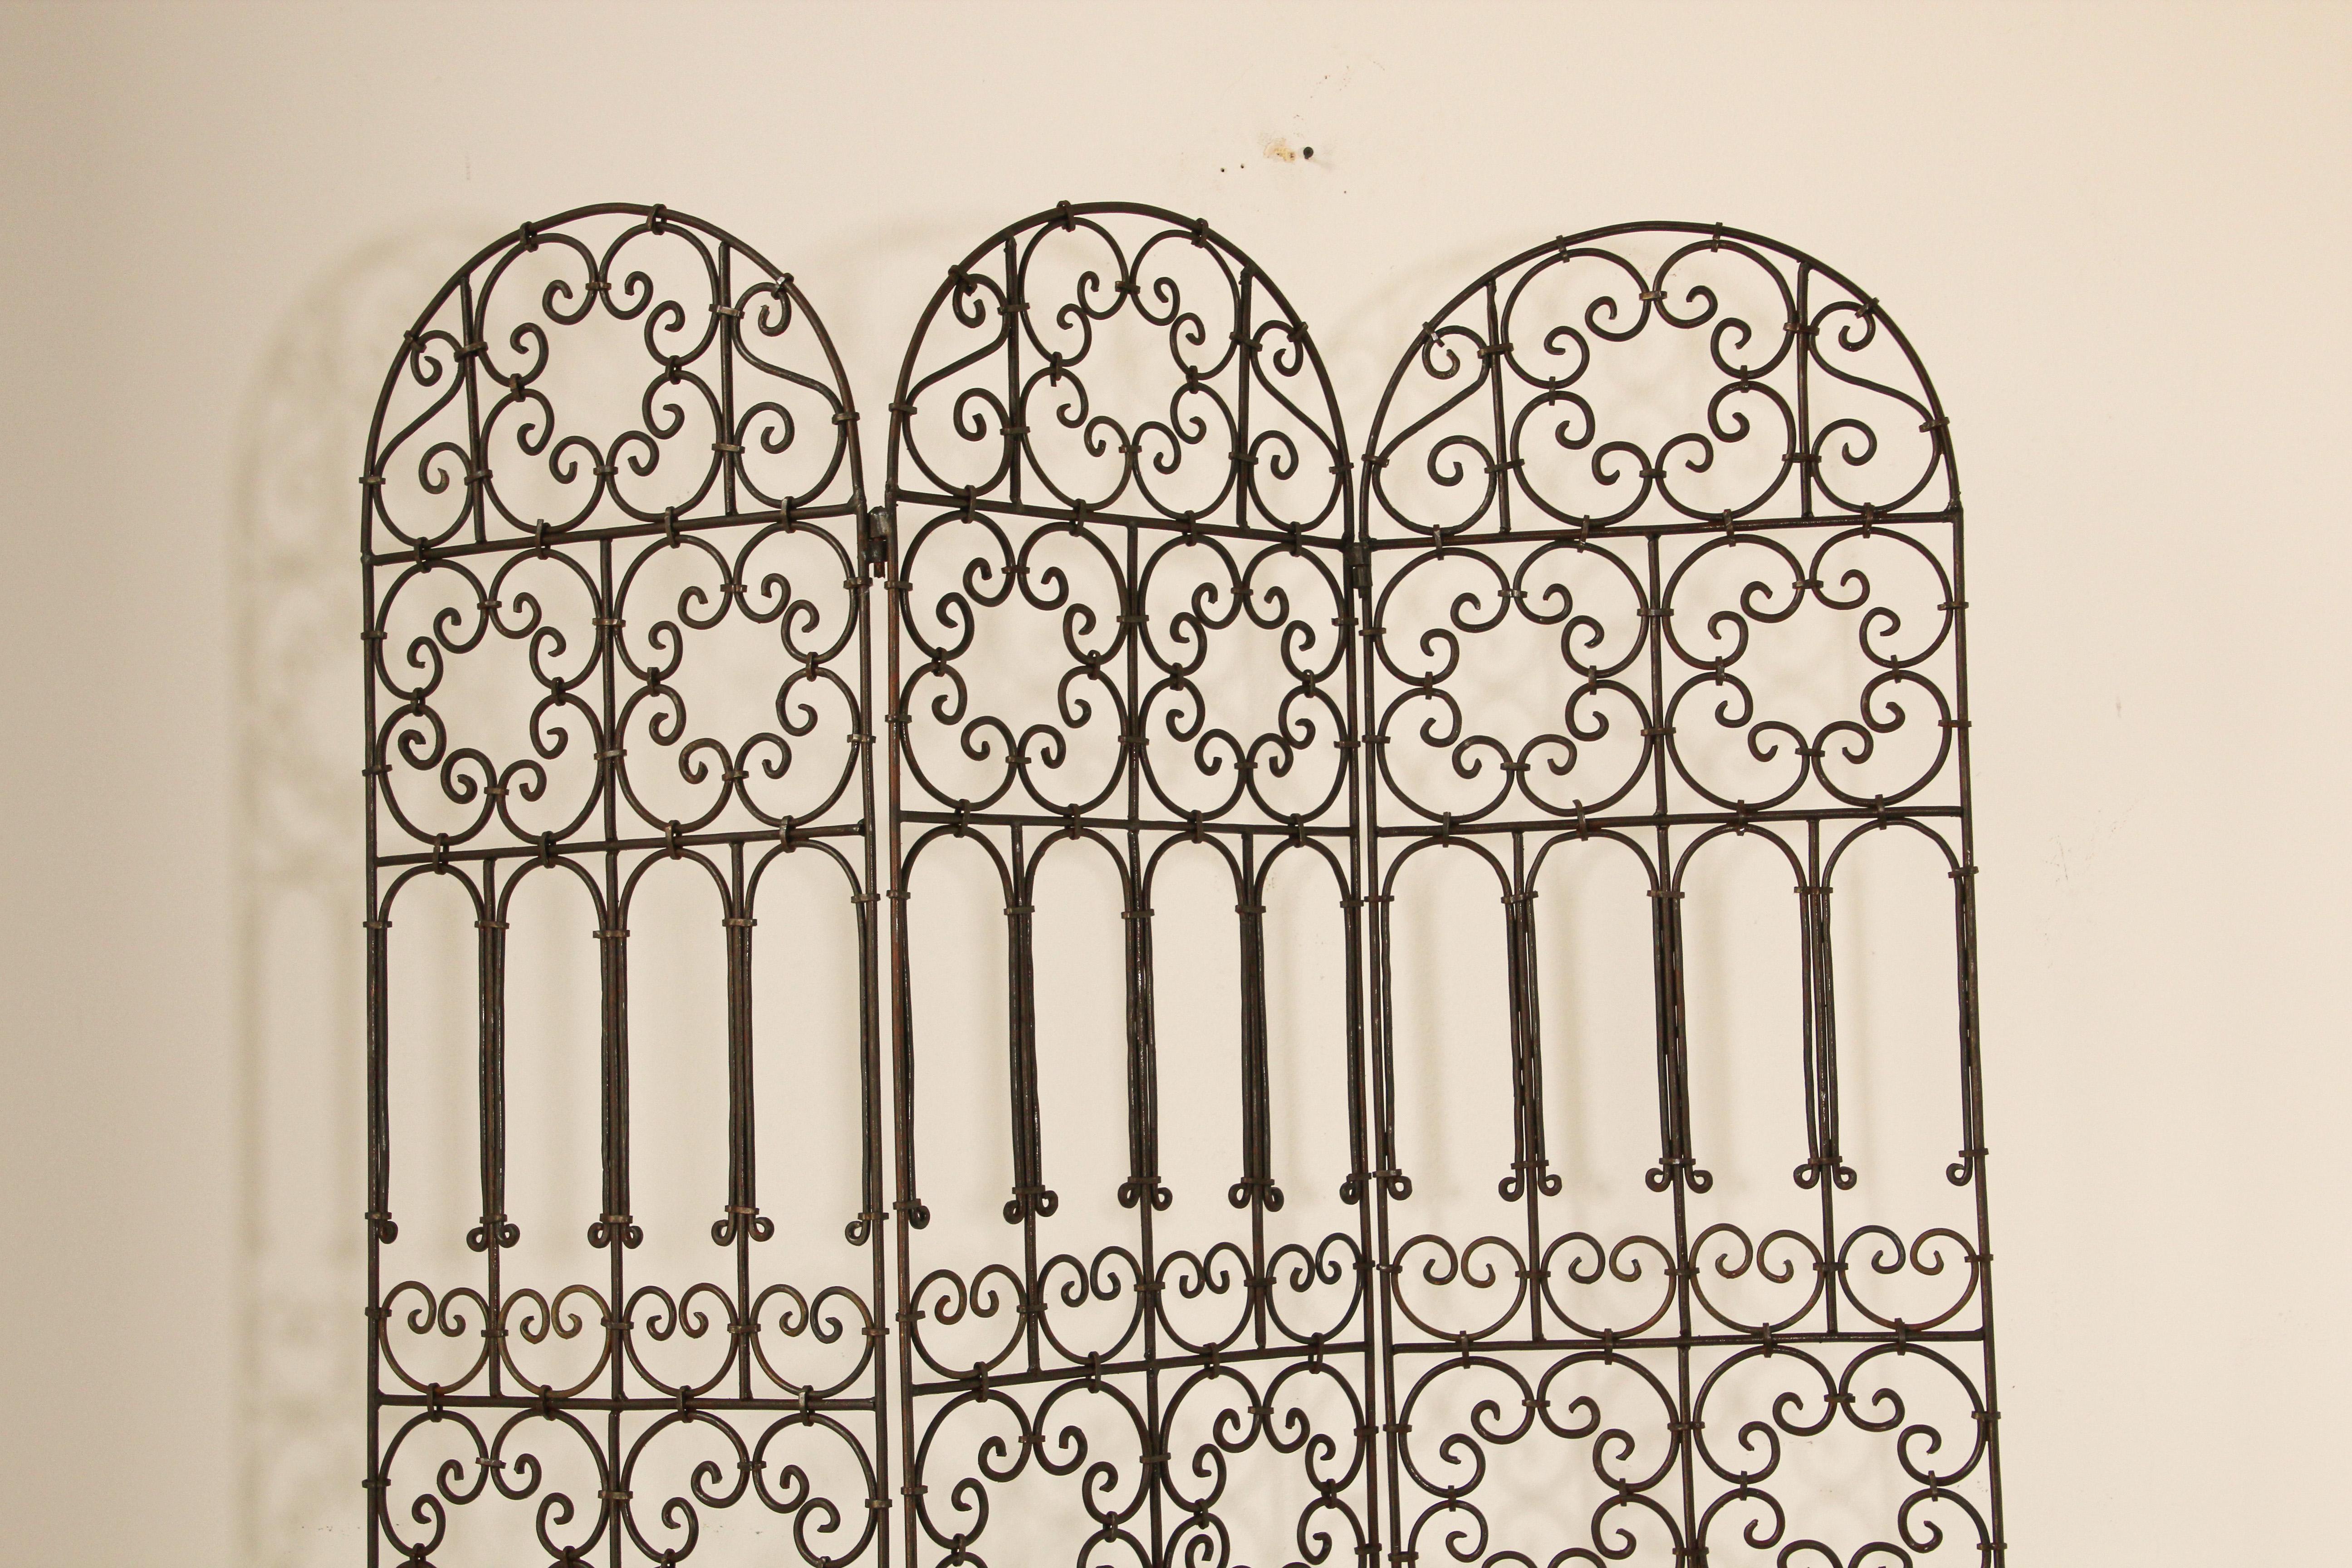 Hand forged folding Moroccan iron screen with three panels decorated with Moorish designs.
Classic and elegant Art & Craft this highly embellished, detailed folding screen divider in the Mediterranean Spanish style iron art work would embellish any